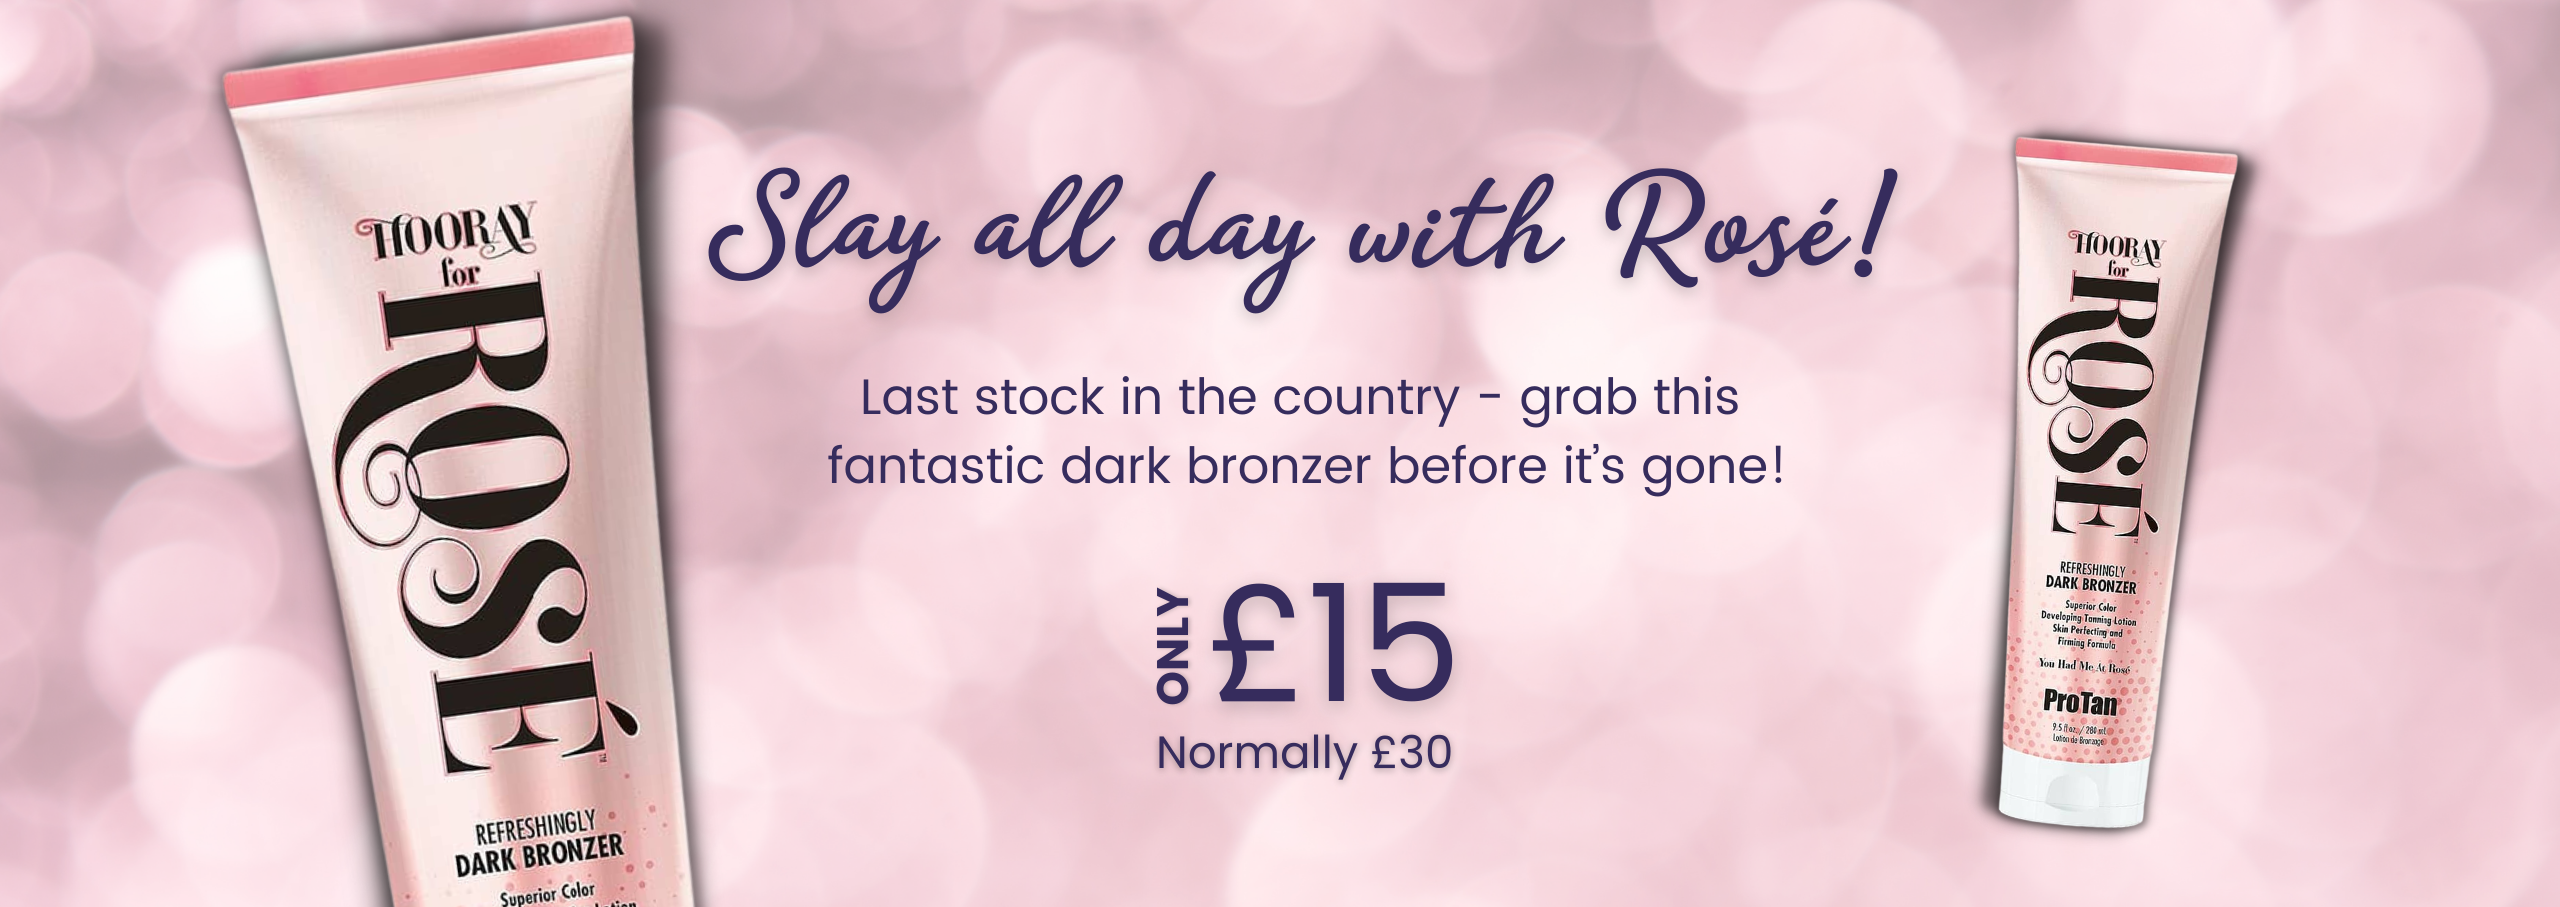 Hooray for Rose bronzer normally £30, now only £15